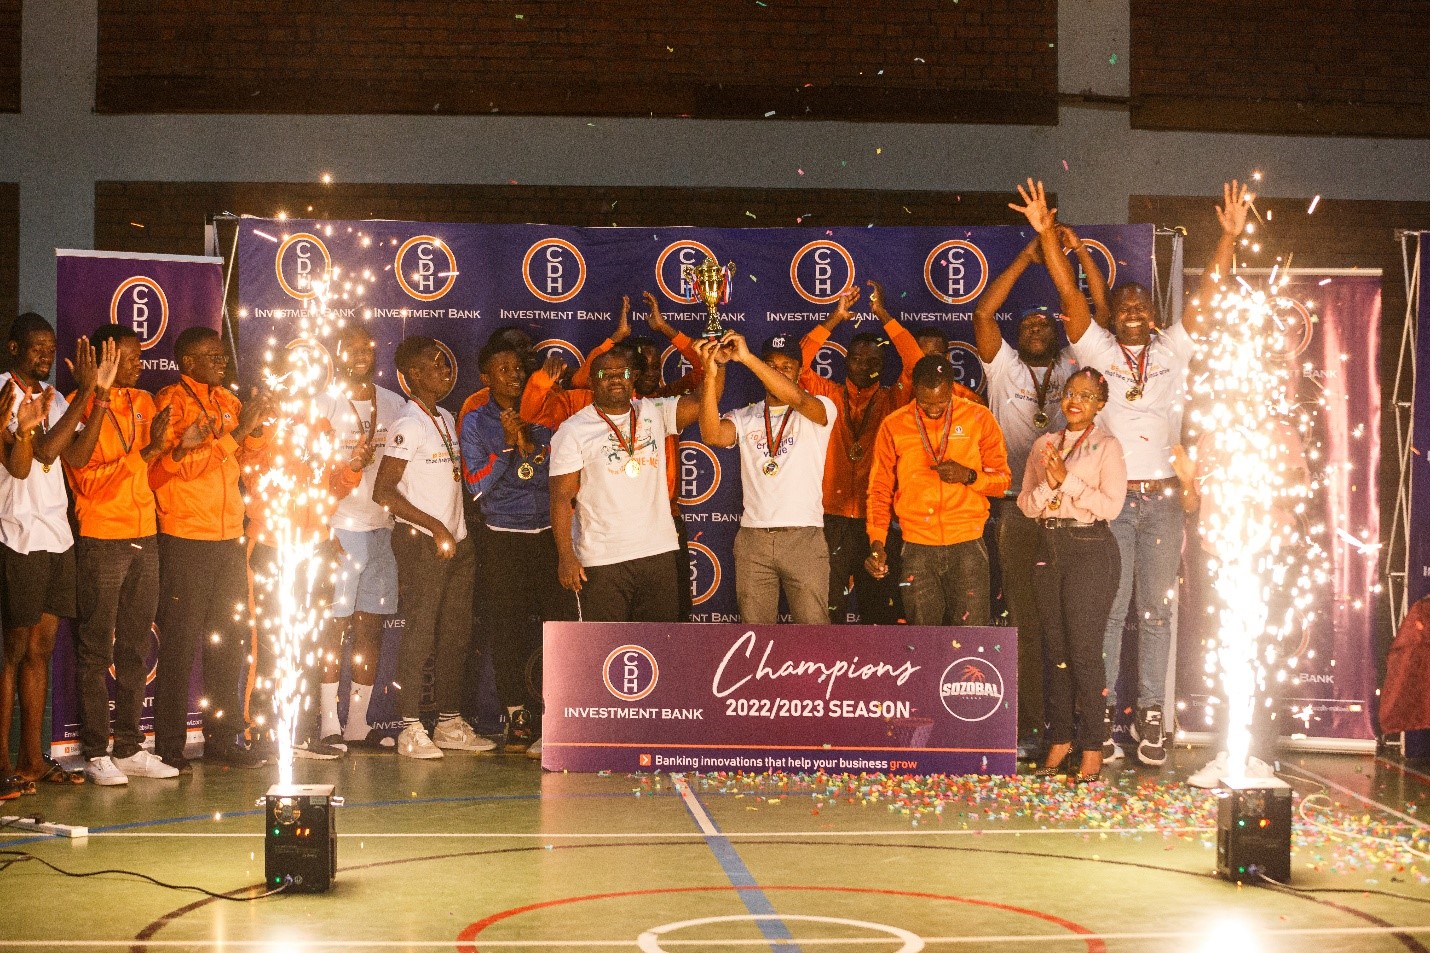 CDH Basketball team being crowned champions of the 2022/23 SOZOBAL basketball league